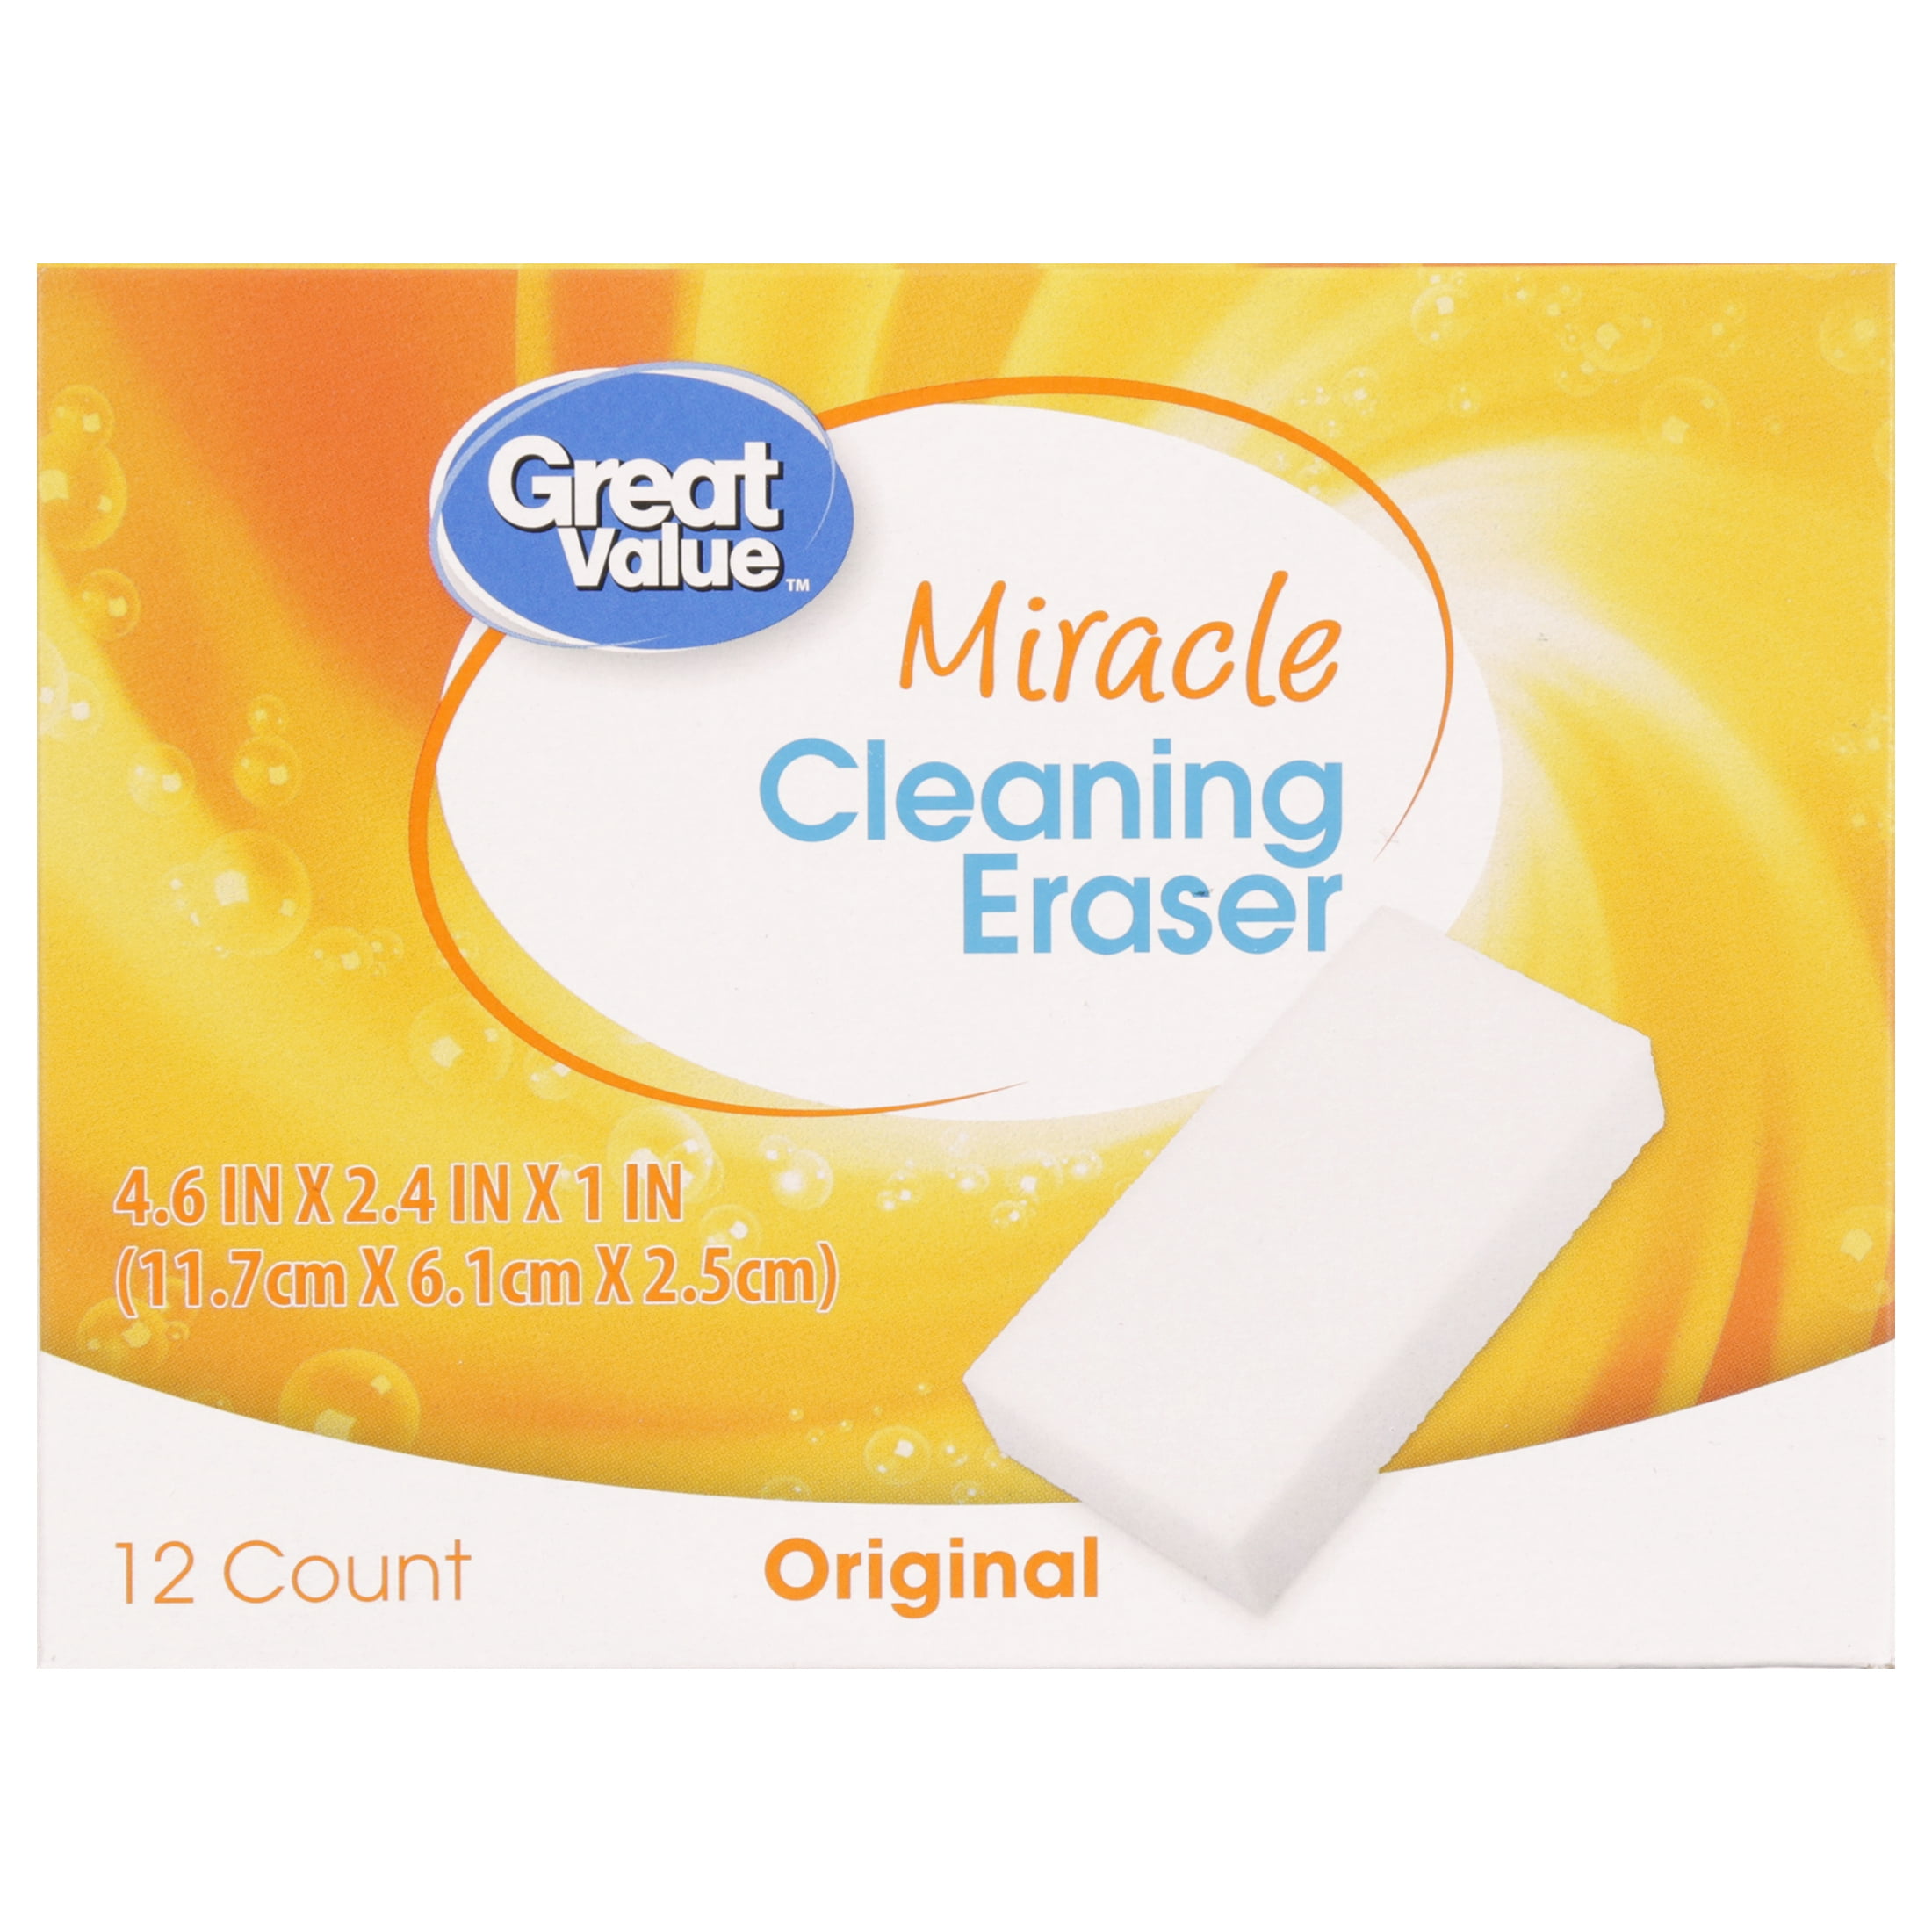 Great Value Original Miracle Cleaning Eraser, 12 Count